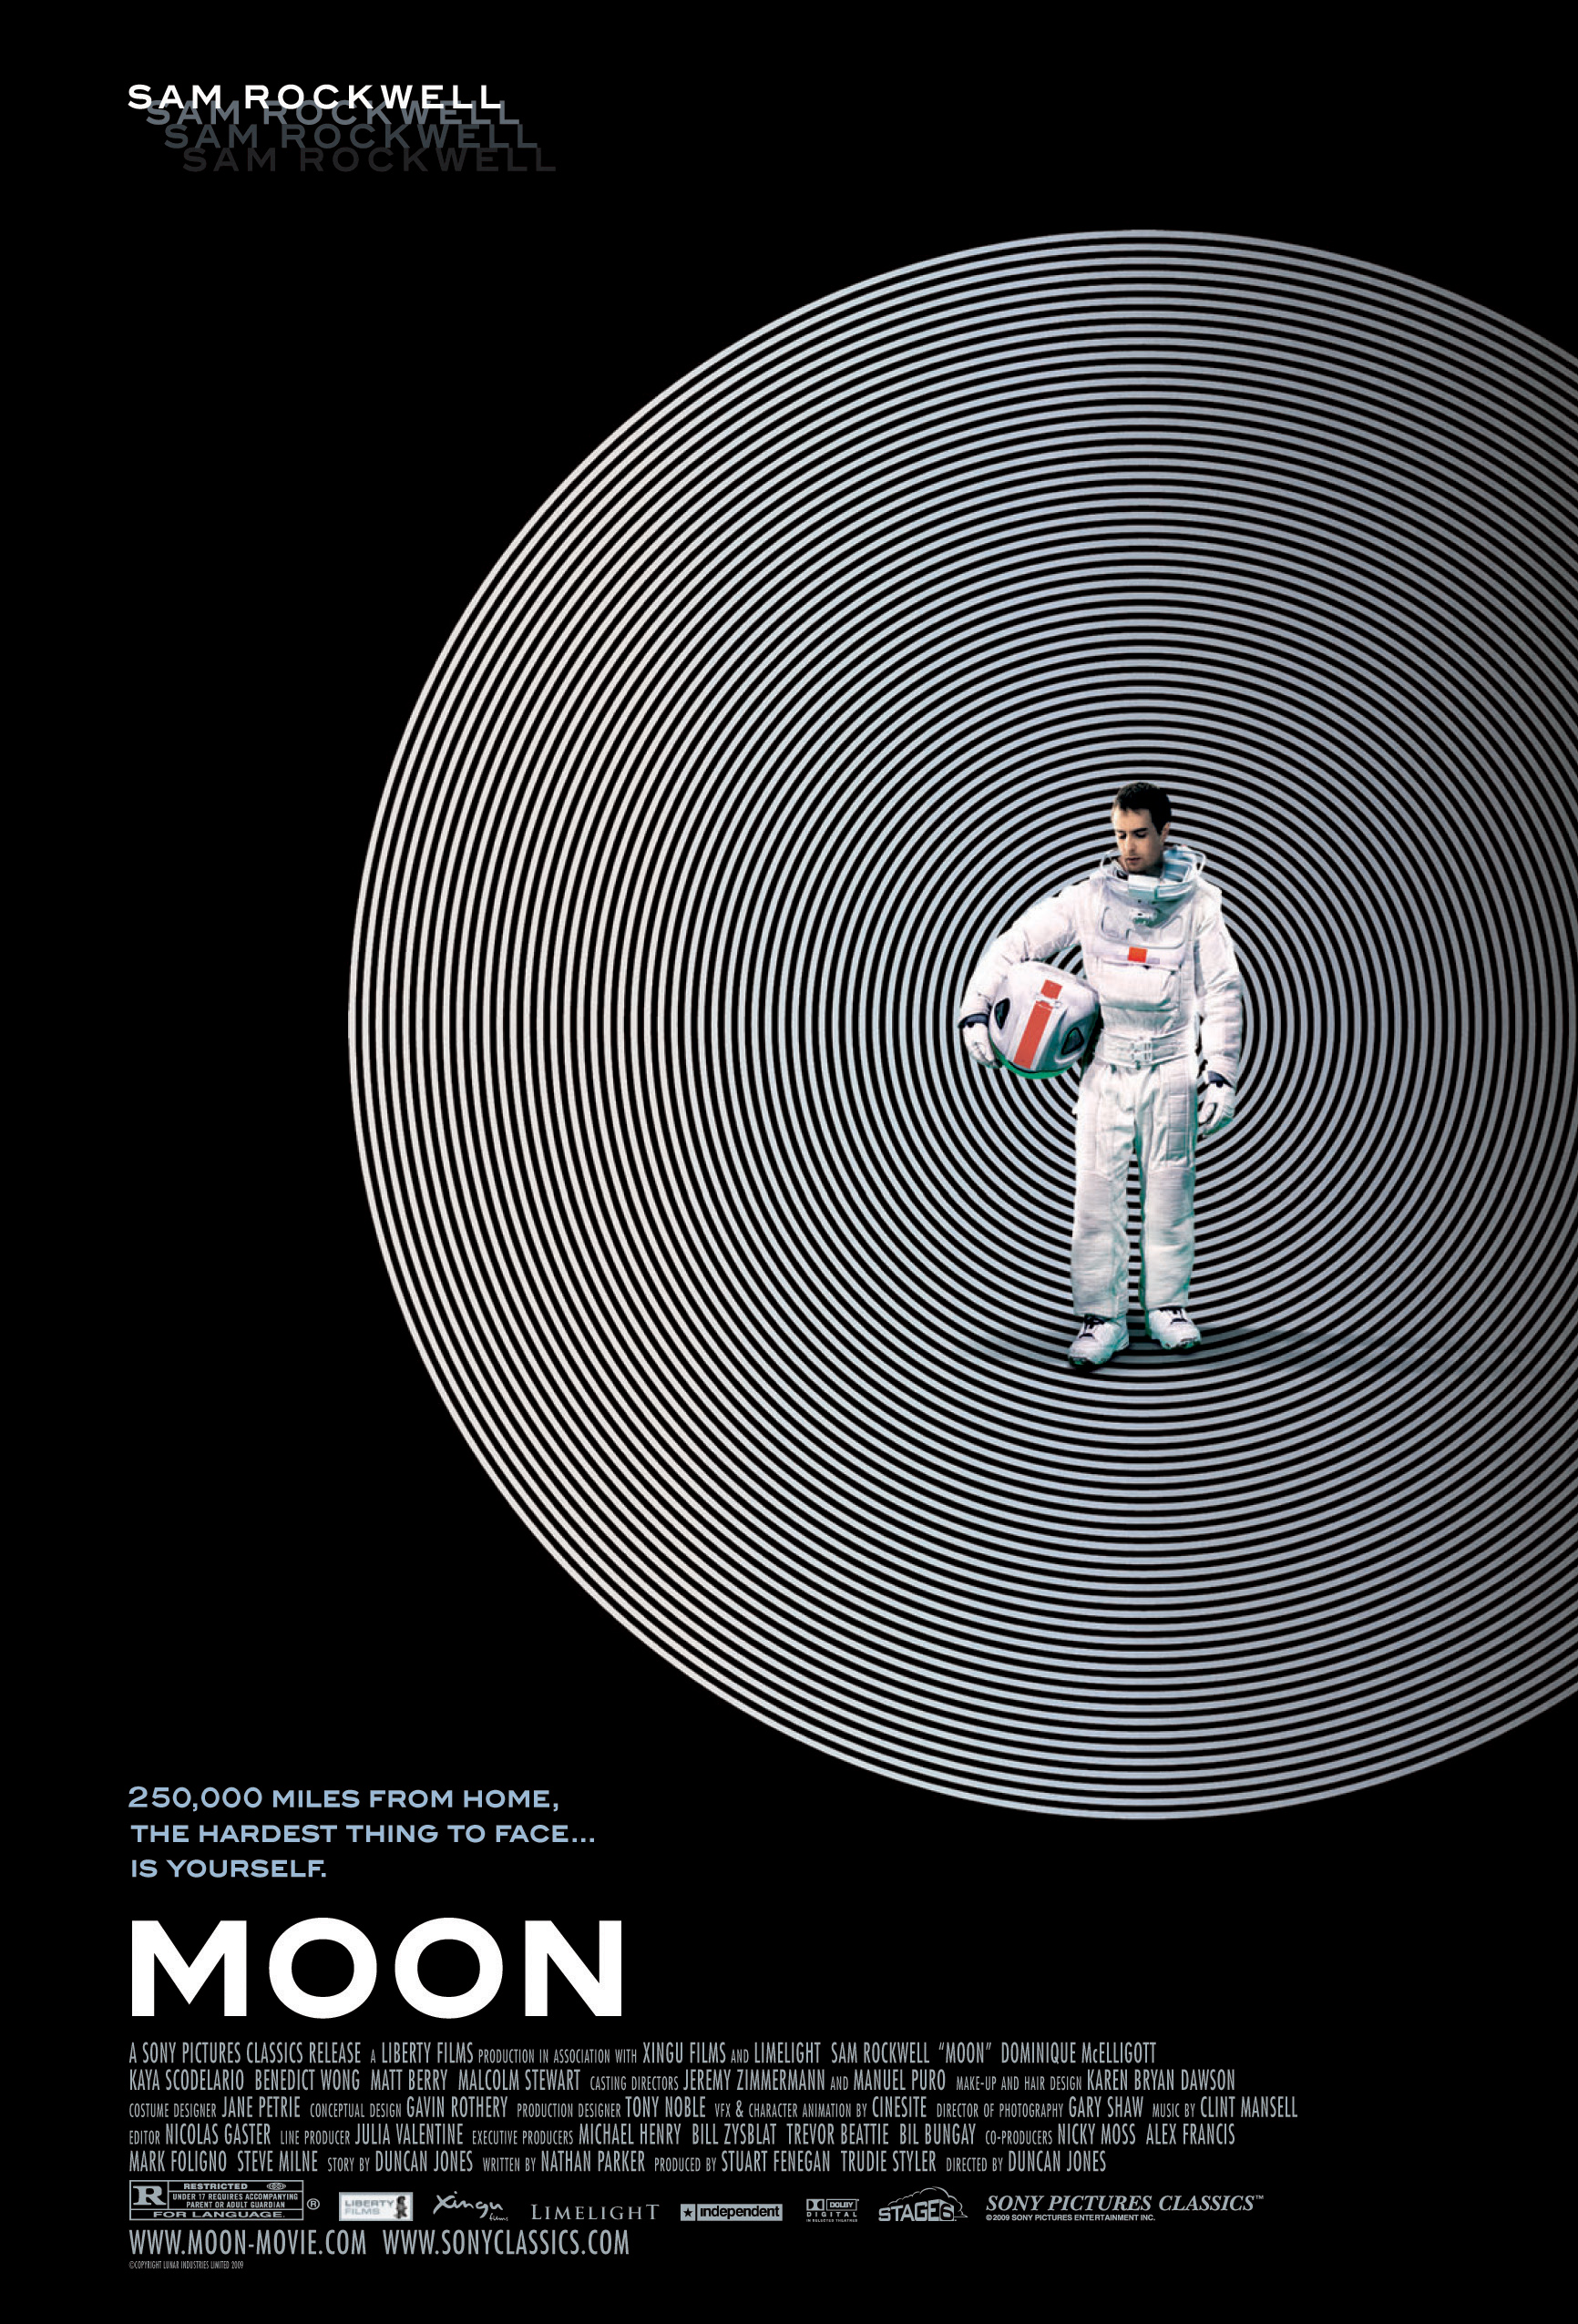 MOON - Poster Available Now!